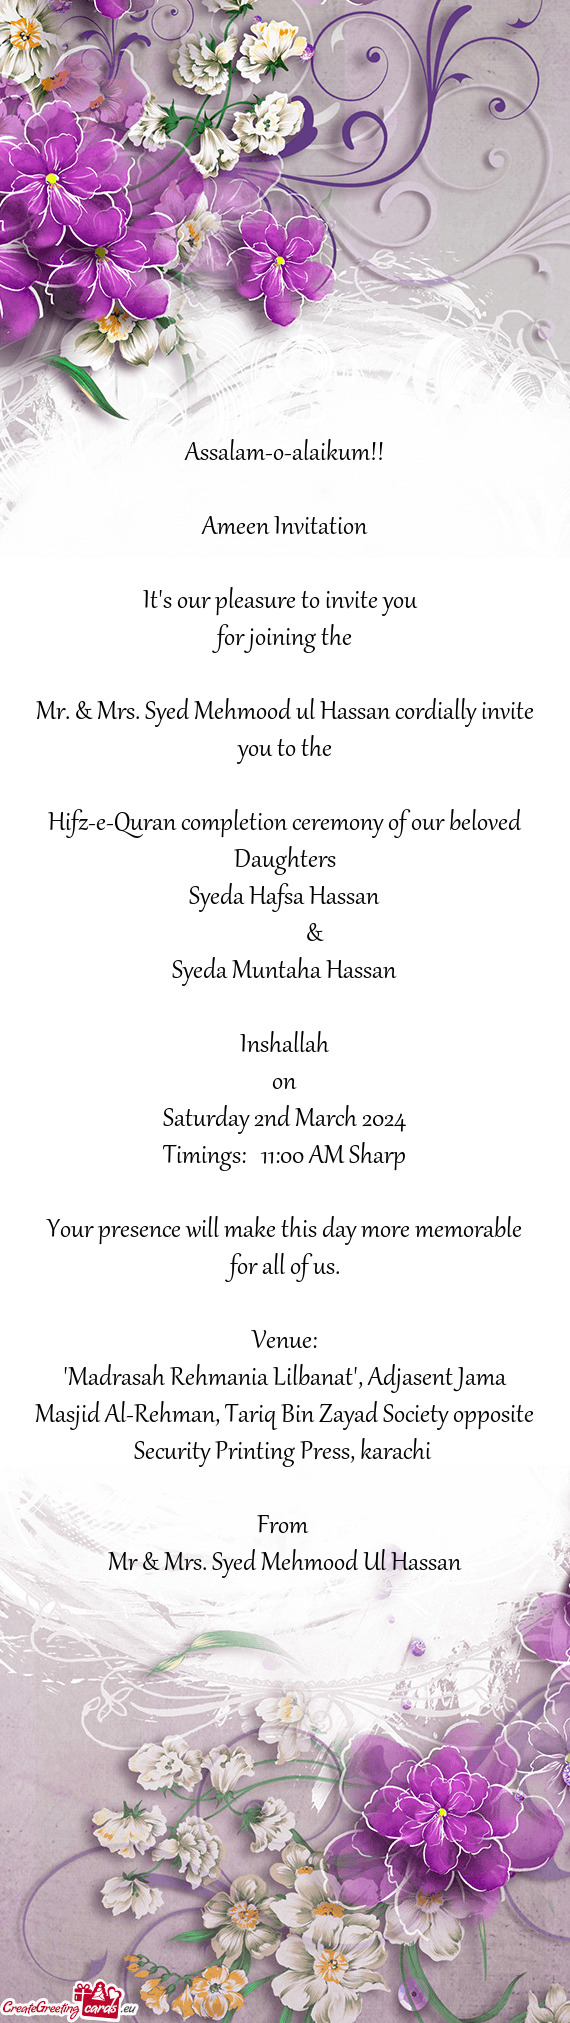 Mr. & Mrs. Syed Mehmood ul Hassan cordially invite you to the